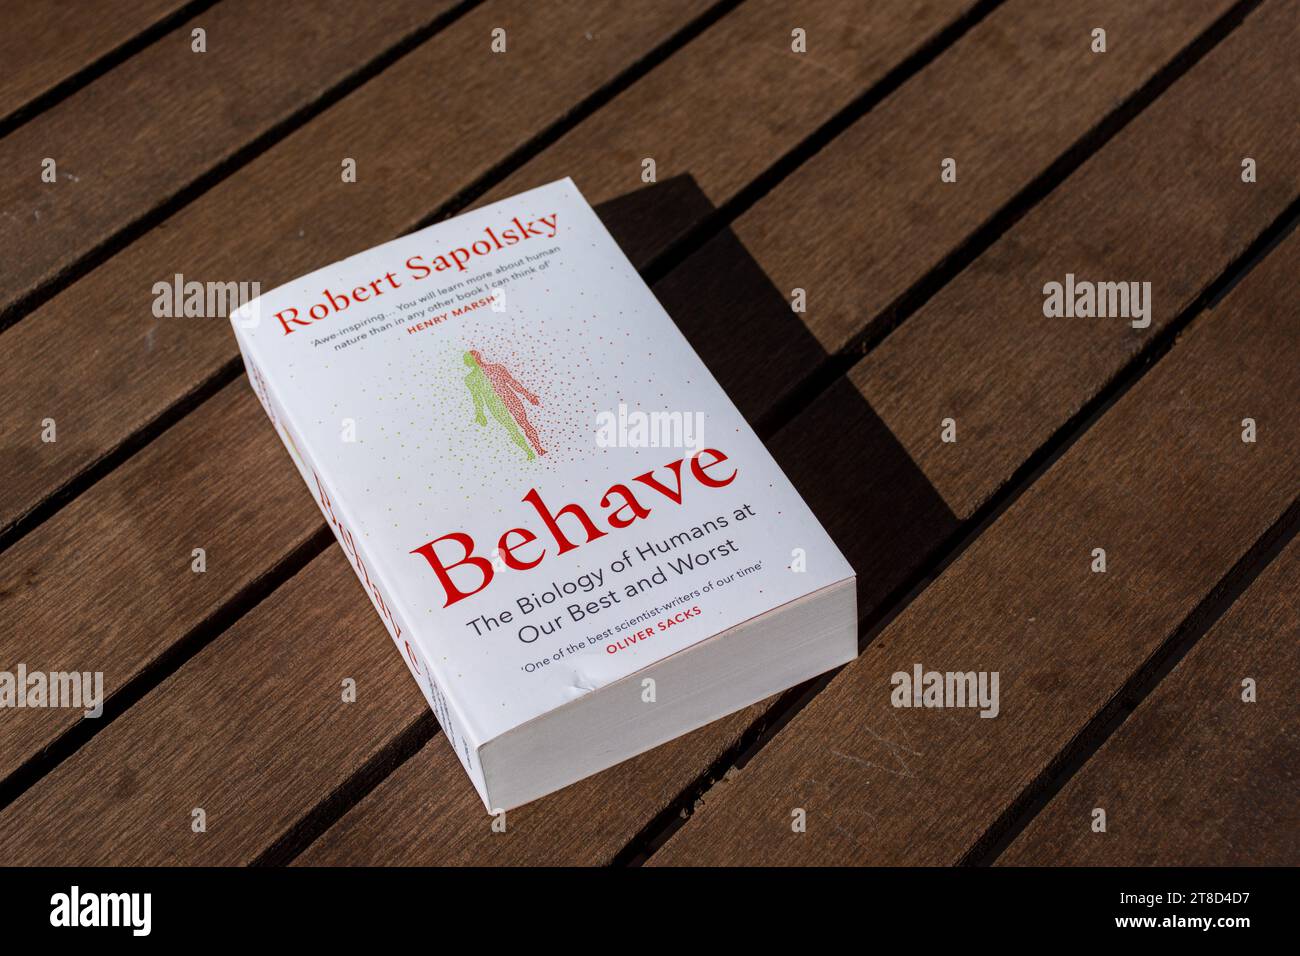 Close-up Robert Sapolsky's Behave book on a wooden table. Stock Photo